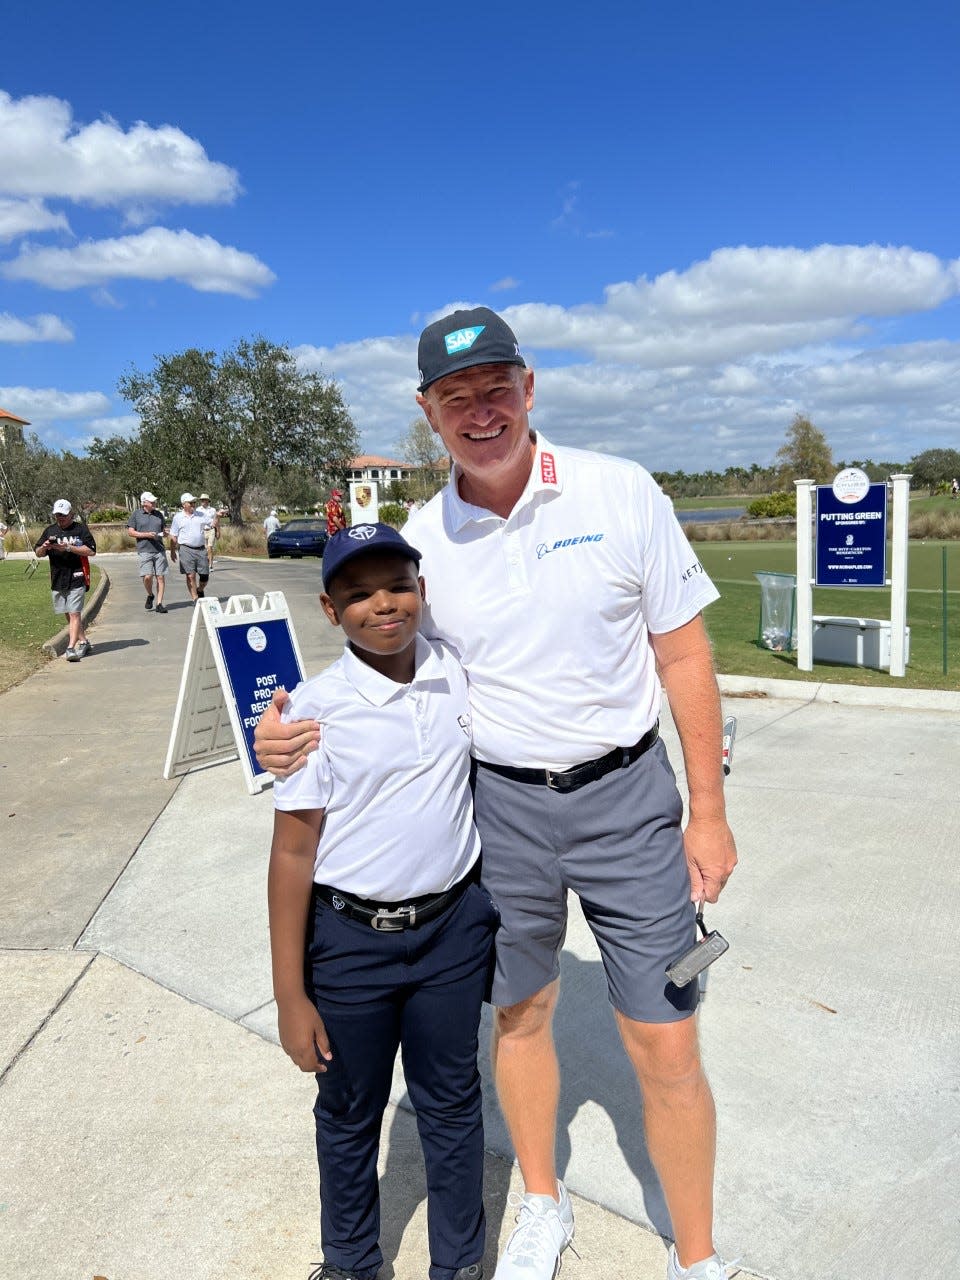 In a recent photo, Ernie Els is seen with Carter Bonas, a young man who is on the autism spectrum. Bonas started his own golf clothing company, Spectrum Golf, two years after having suicidal thoughts.